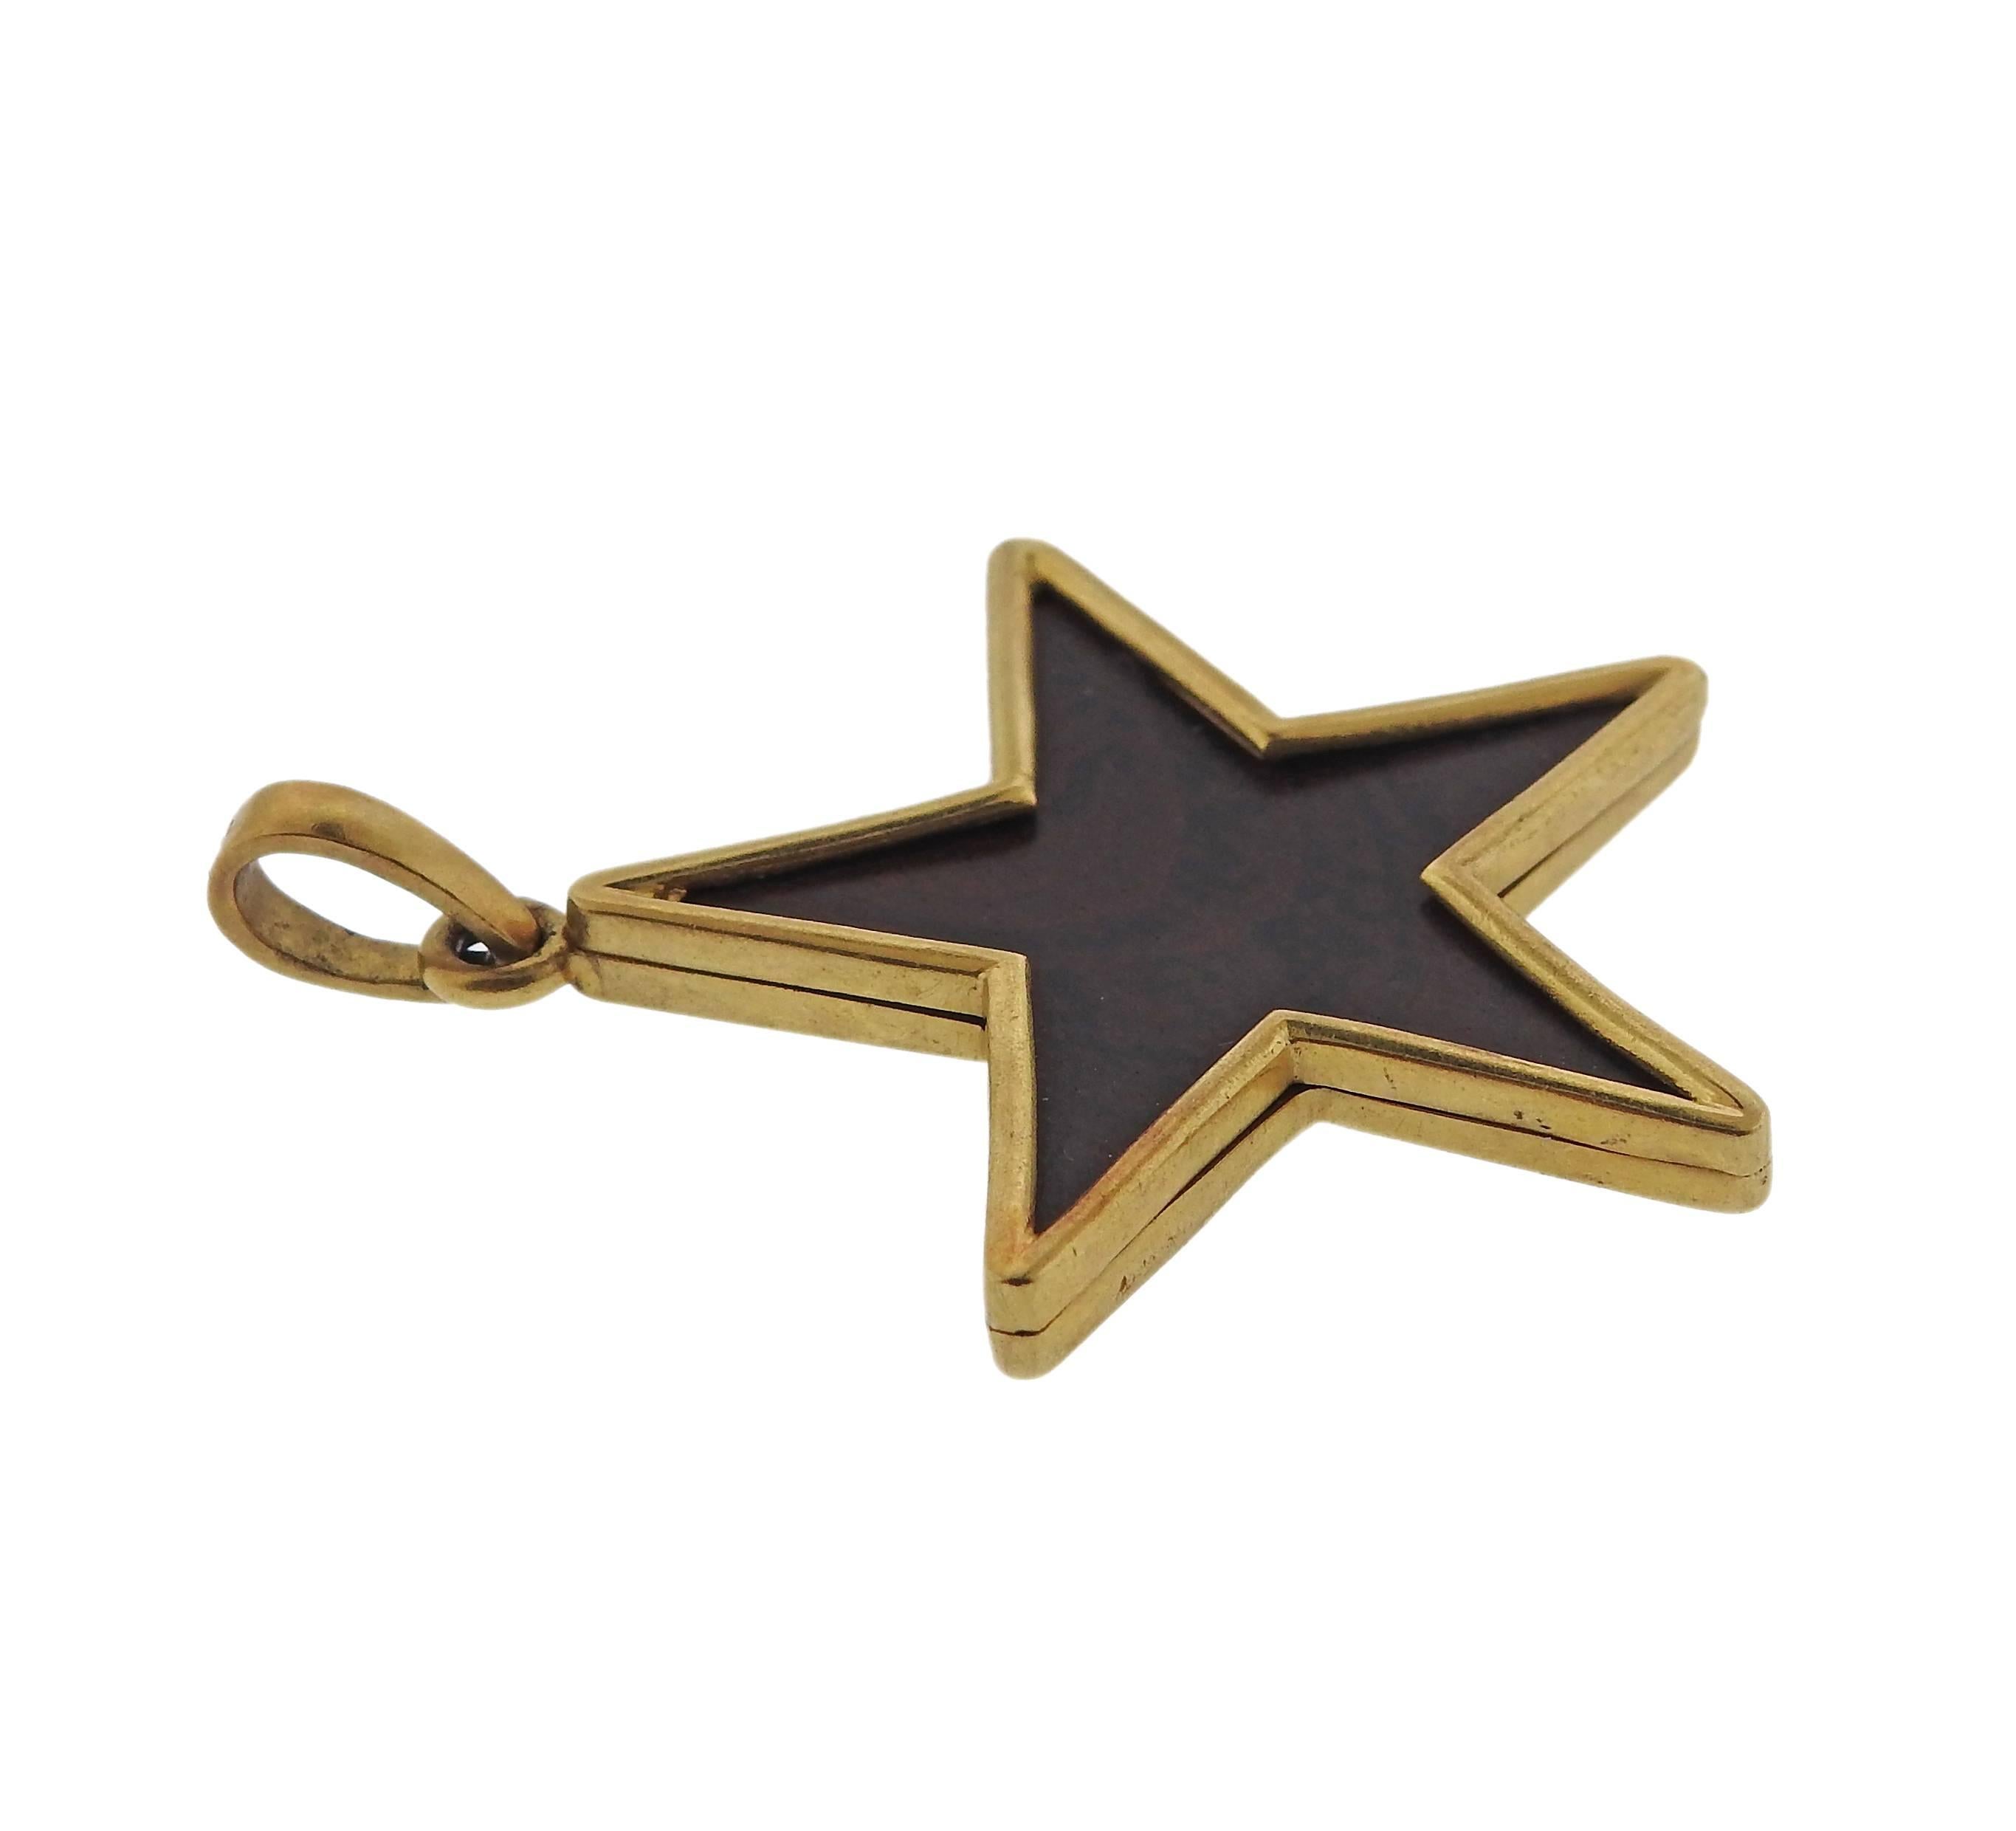 Vintage 18k gold star pendant, set with ebony wood. Pendant is 48mm x 37mm and weighs 8.2 grams. Marked 750.